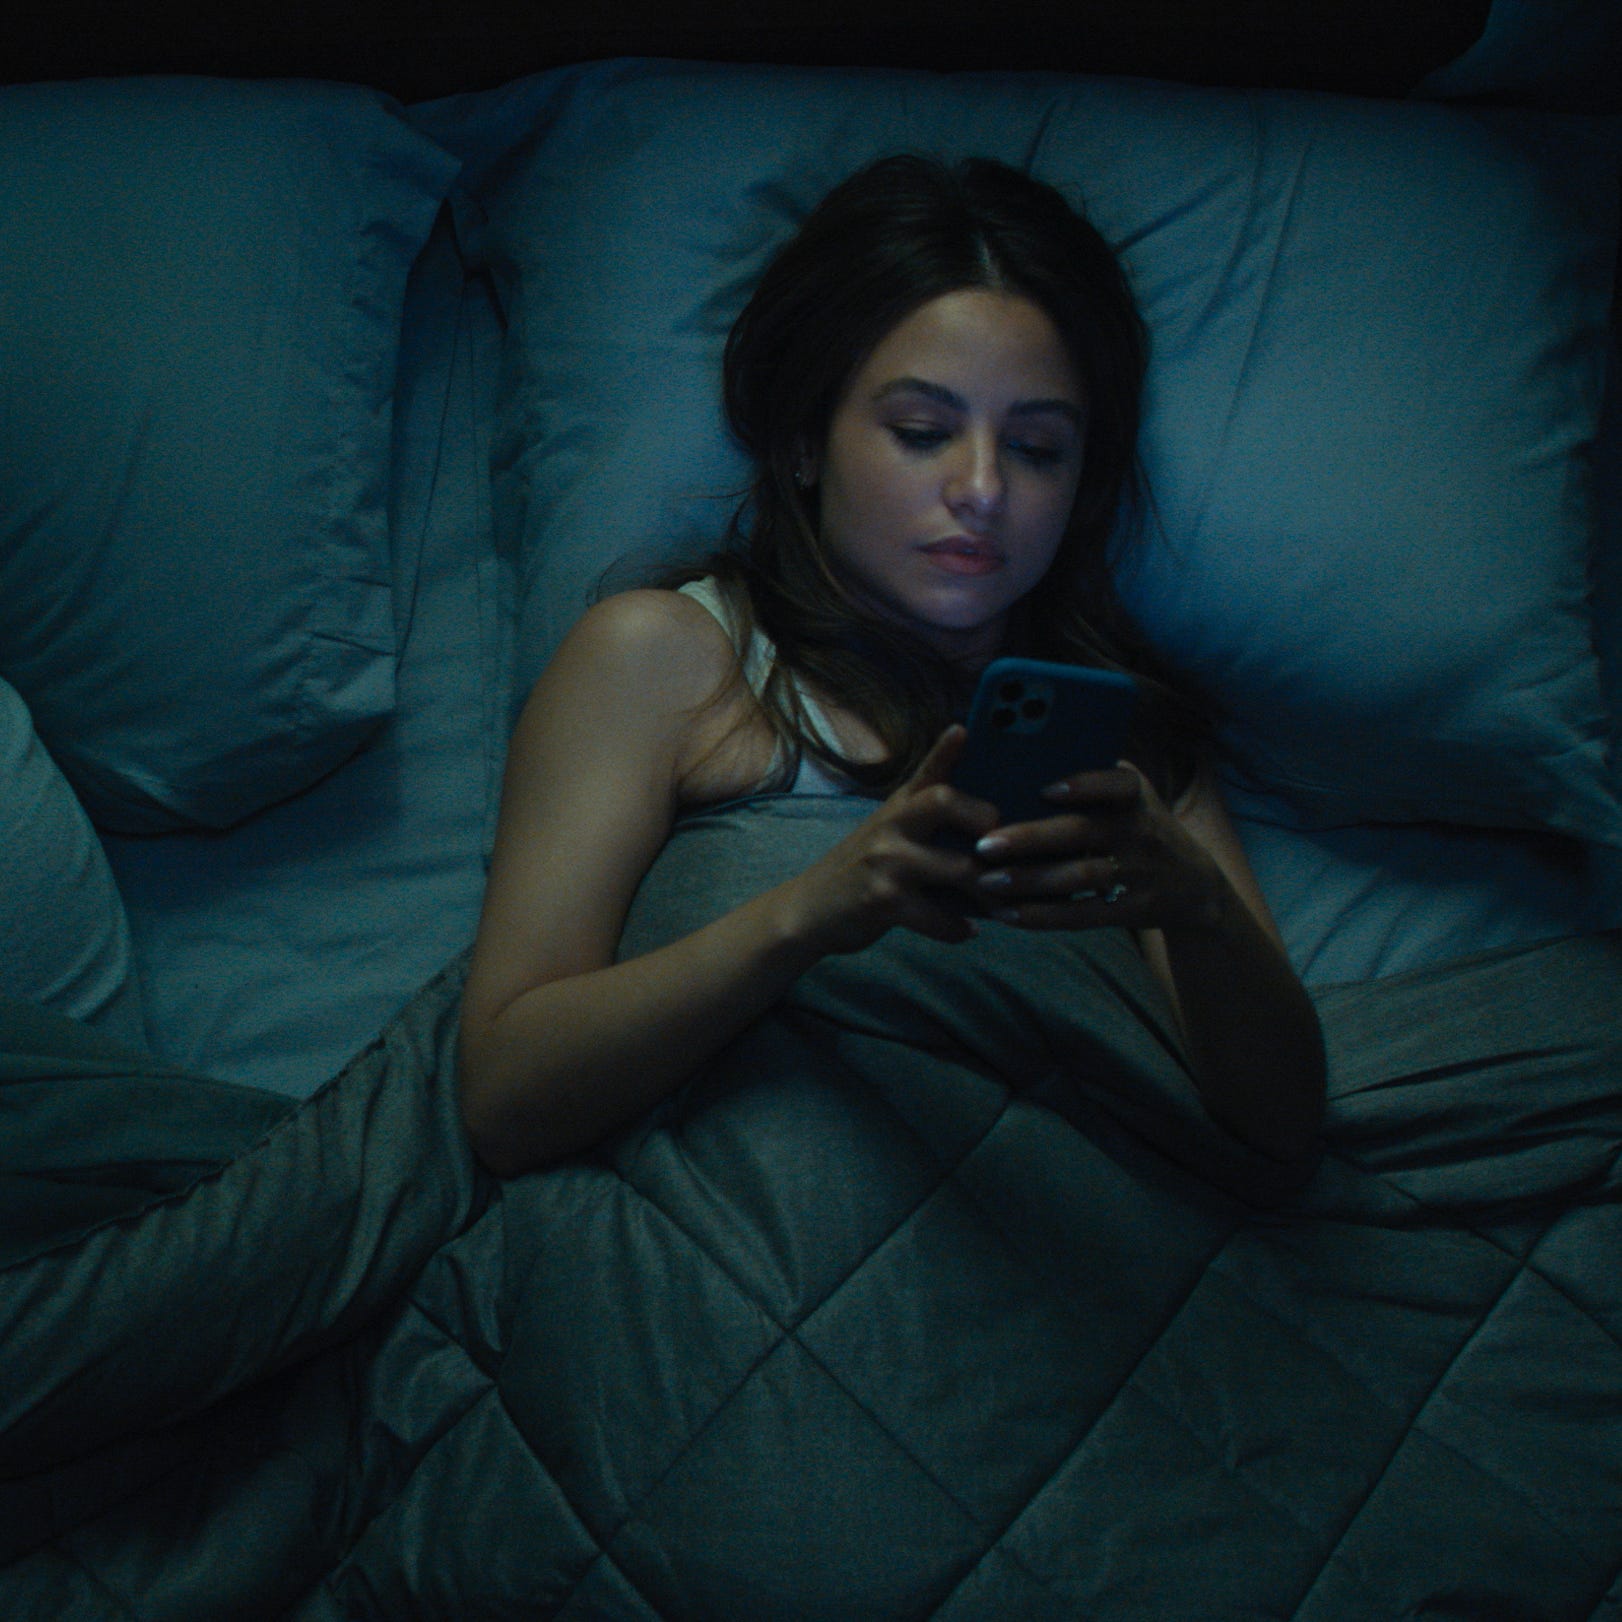 As Craig (Nat Wolff) sleeps, his fiancée Patti (right, Aimee Carrero) answers a late night text from Regus Patoff, the odd new boss at Craig's company.